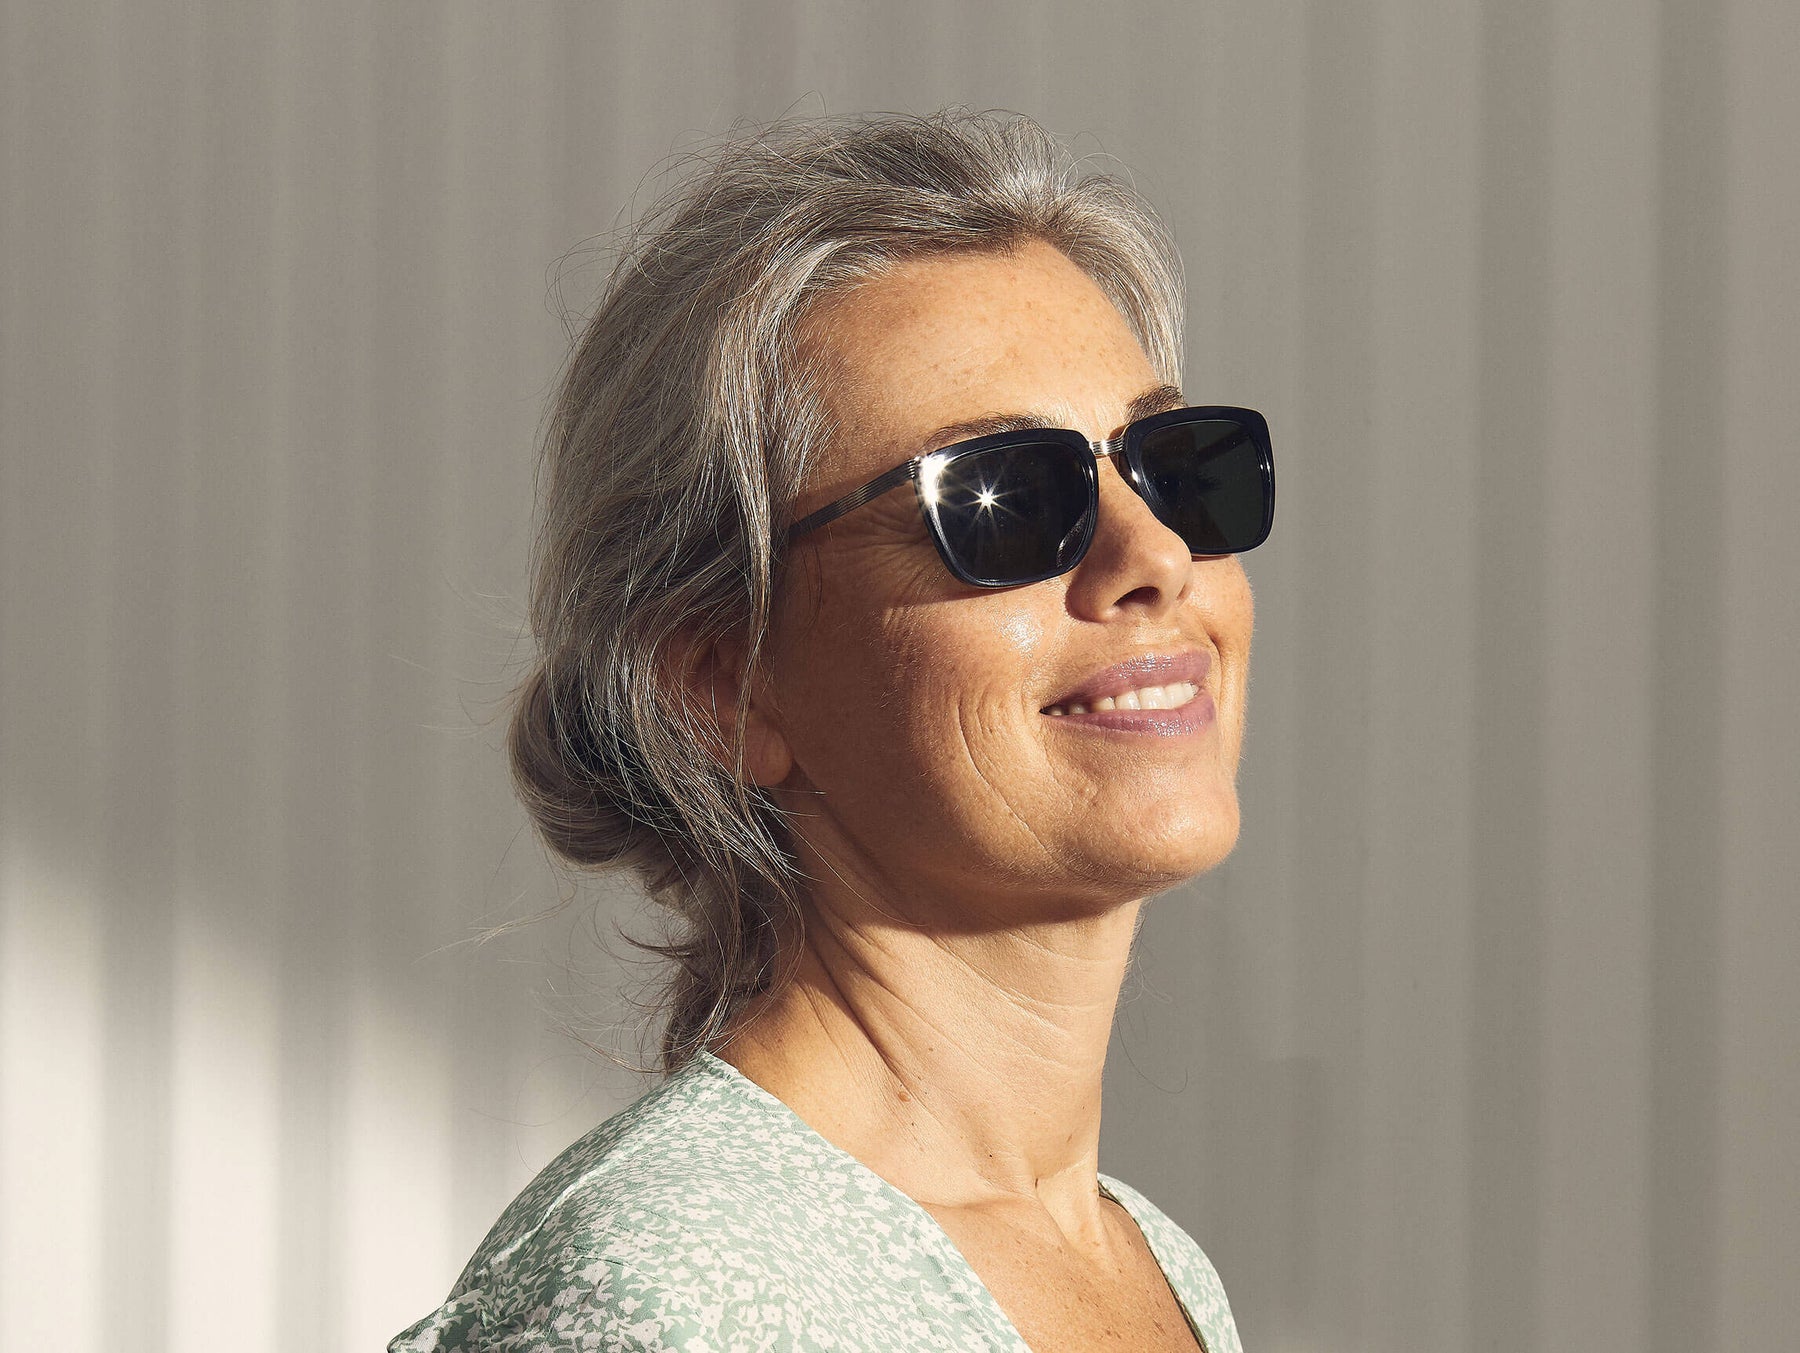 Model is wearing The KLUG SUN in Black/Silver in size 52 with G-15 Glass Lenses